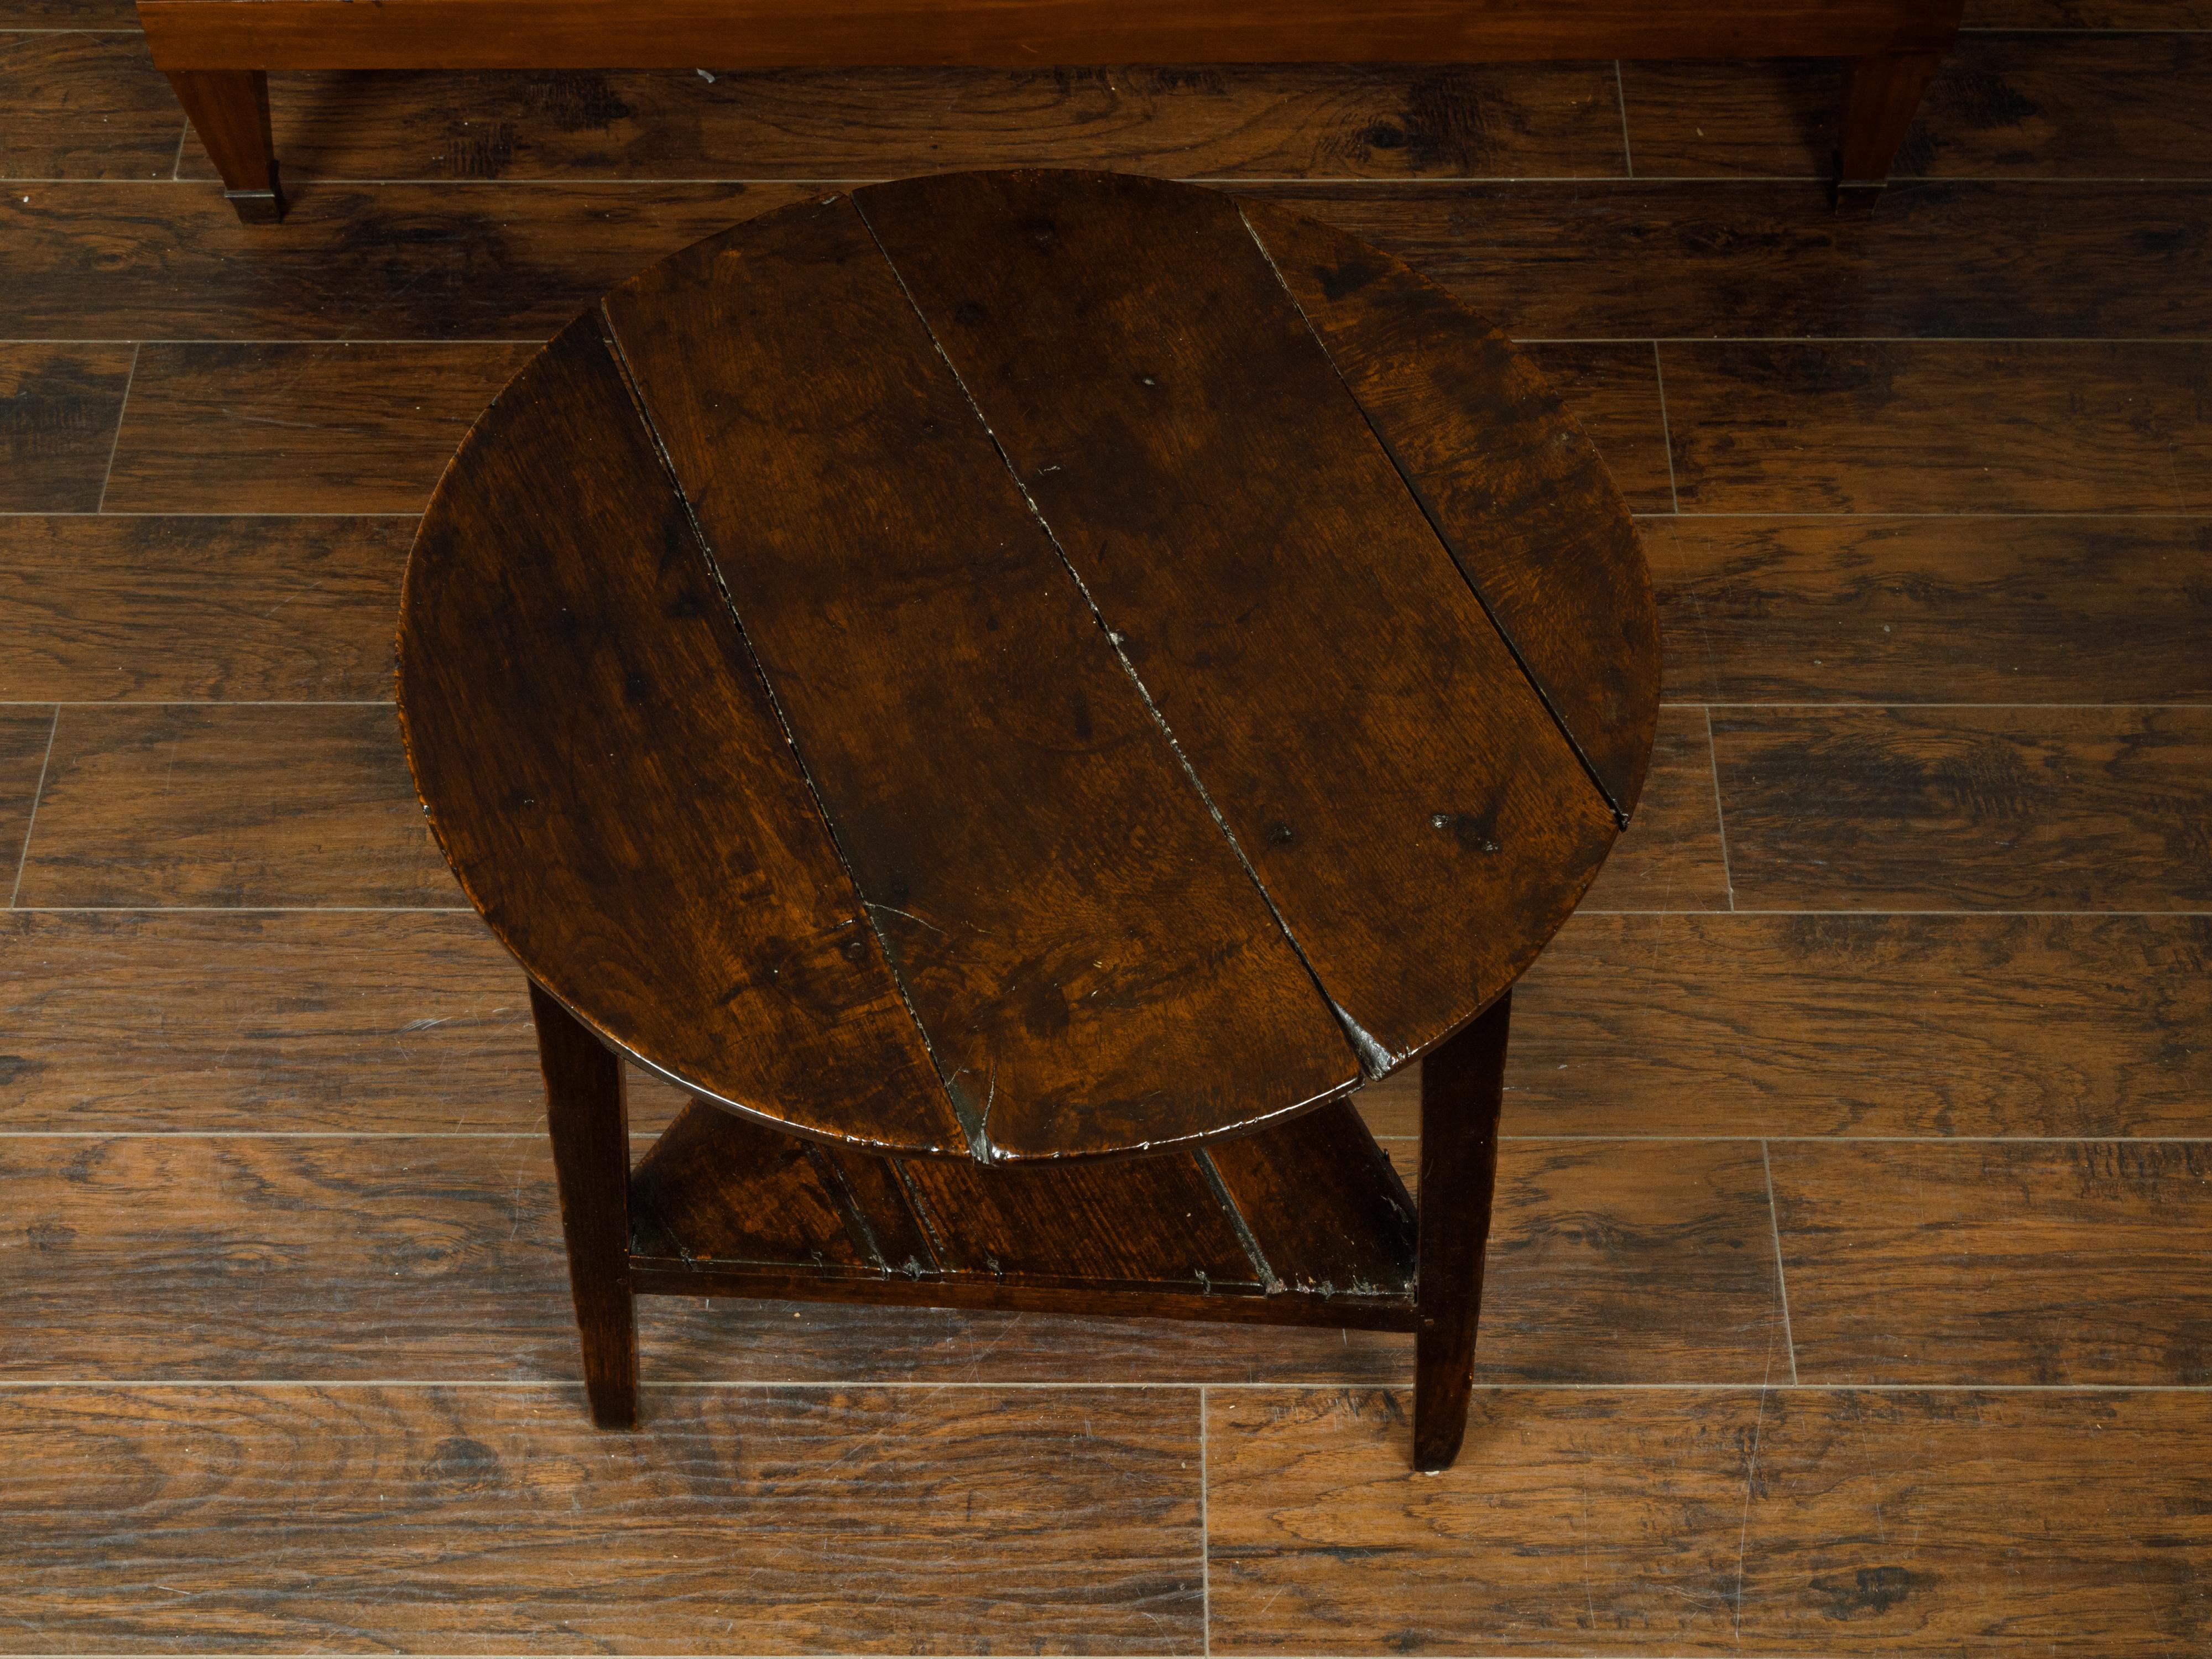 19th Century English 1800s Oak Cricket Table with Circular Top and Triangular Shelf